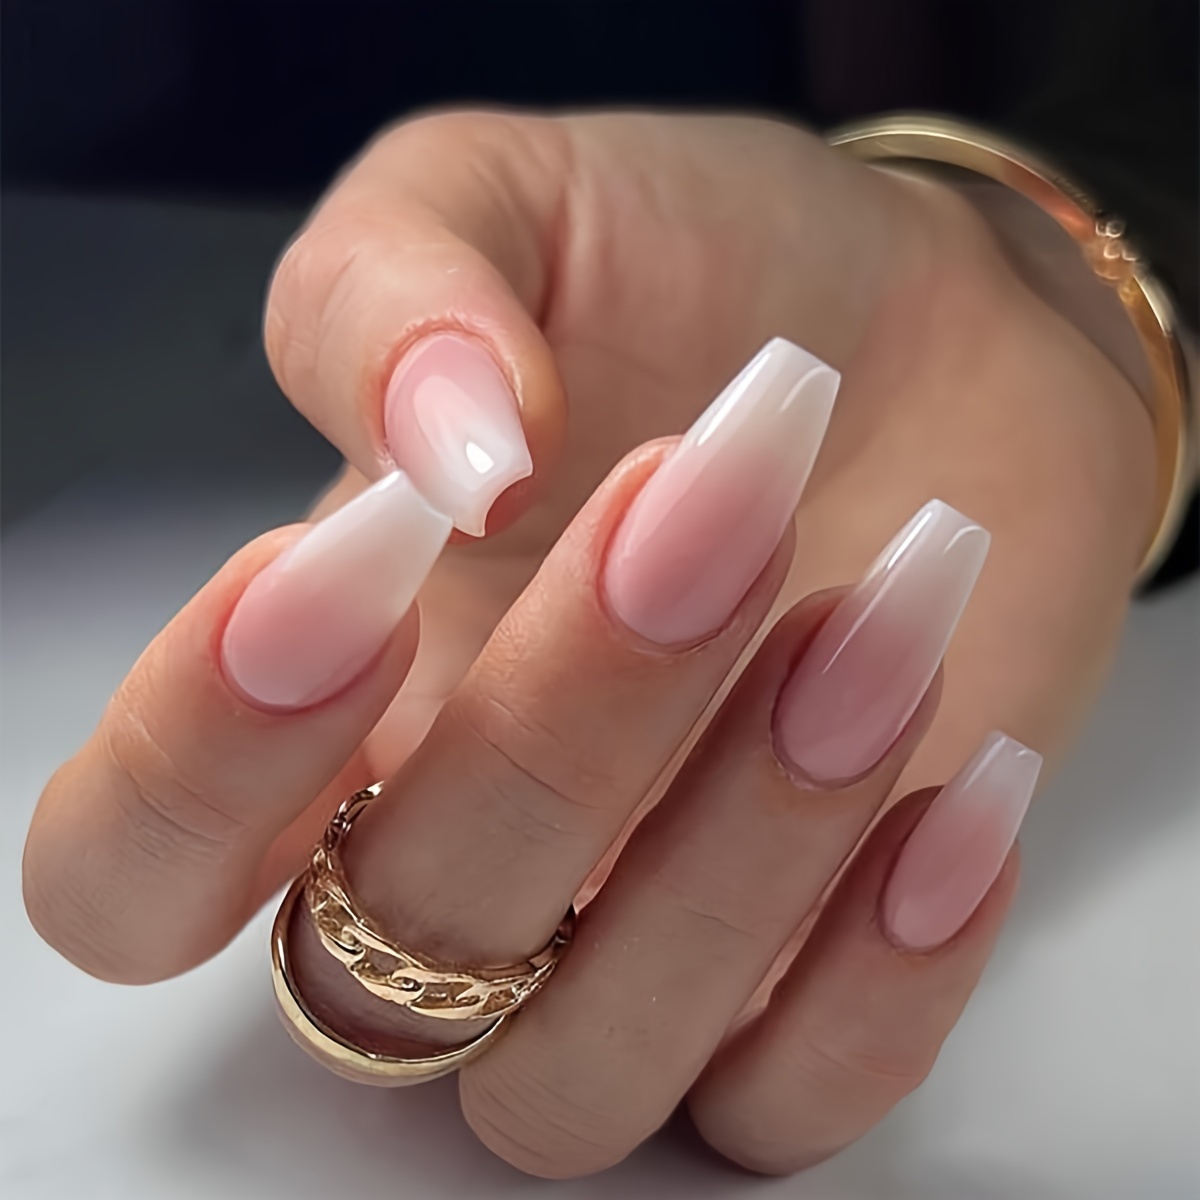  Ombre Press on Nails Almond Glue on Nails Medium Length  Acrylic Nails Nude White Gradient Fake Nails 24 Fake Nails in 12 Sizes,Natural  Nails Press on False Nails with Glue